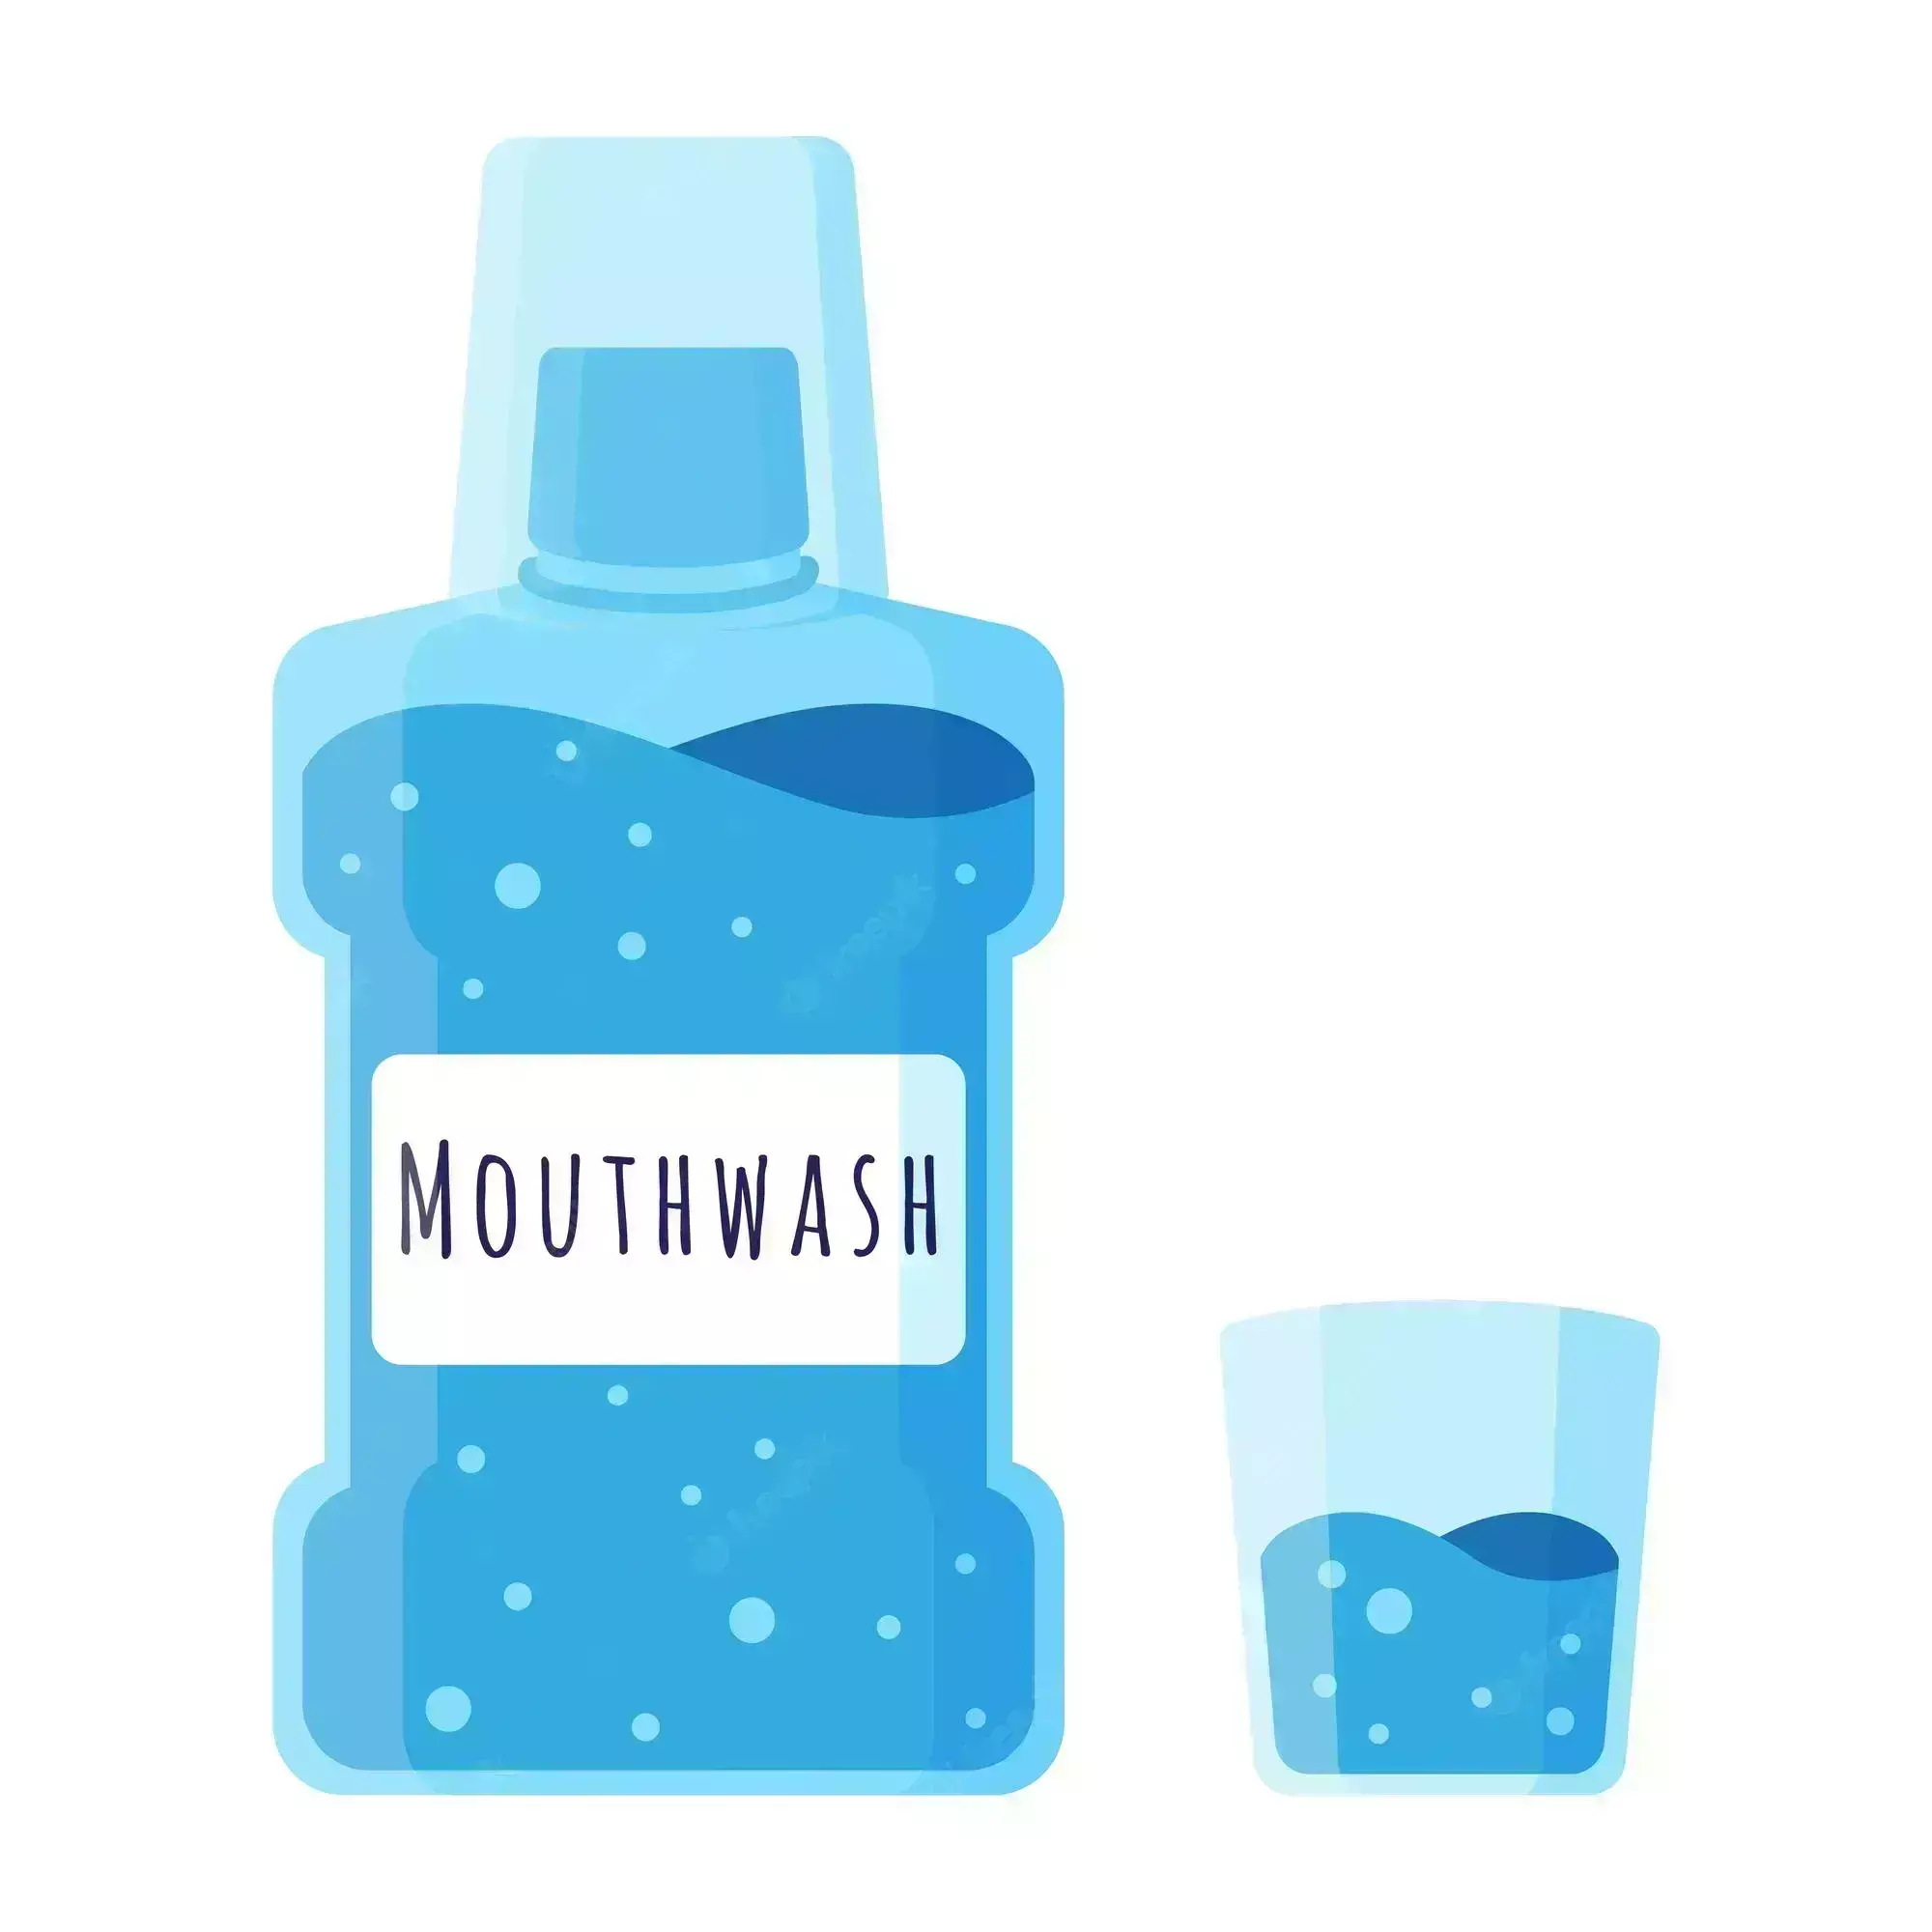 Mouthwash use associated with increased risk of developing prediabetes